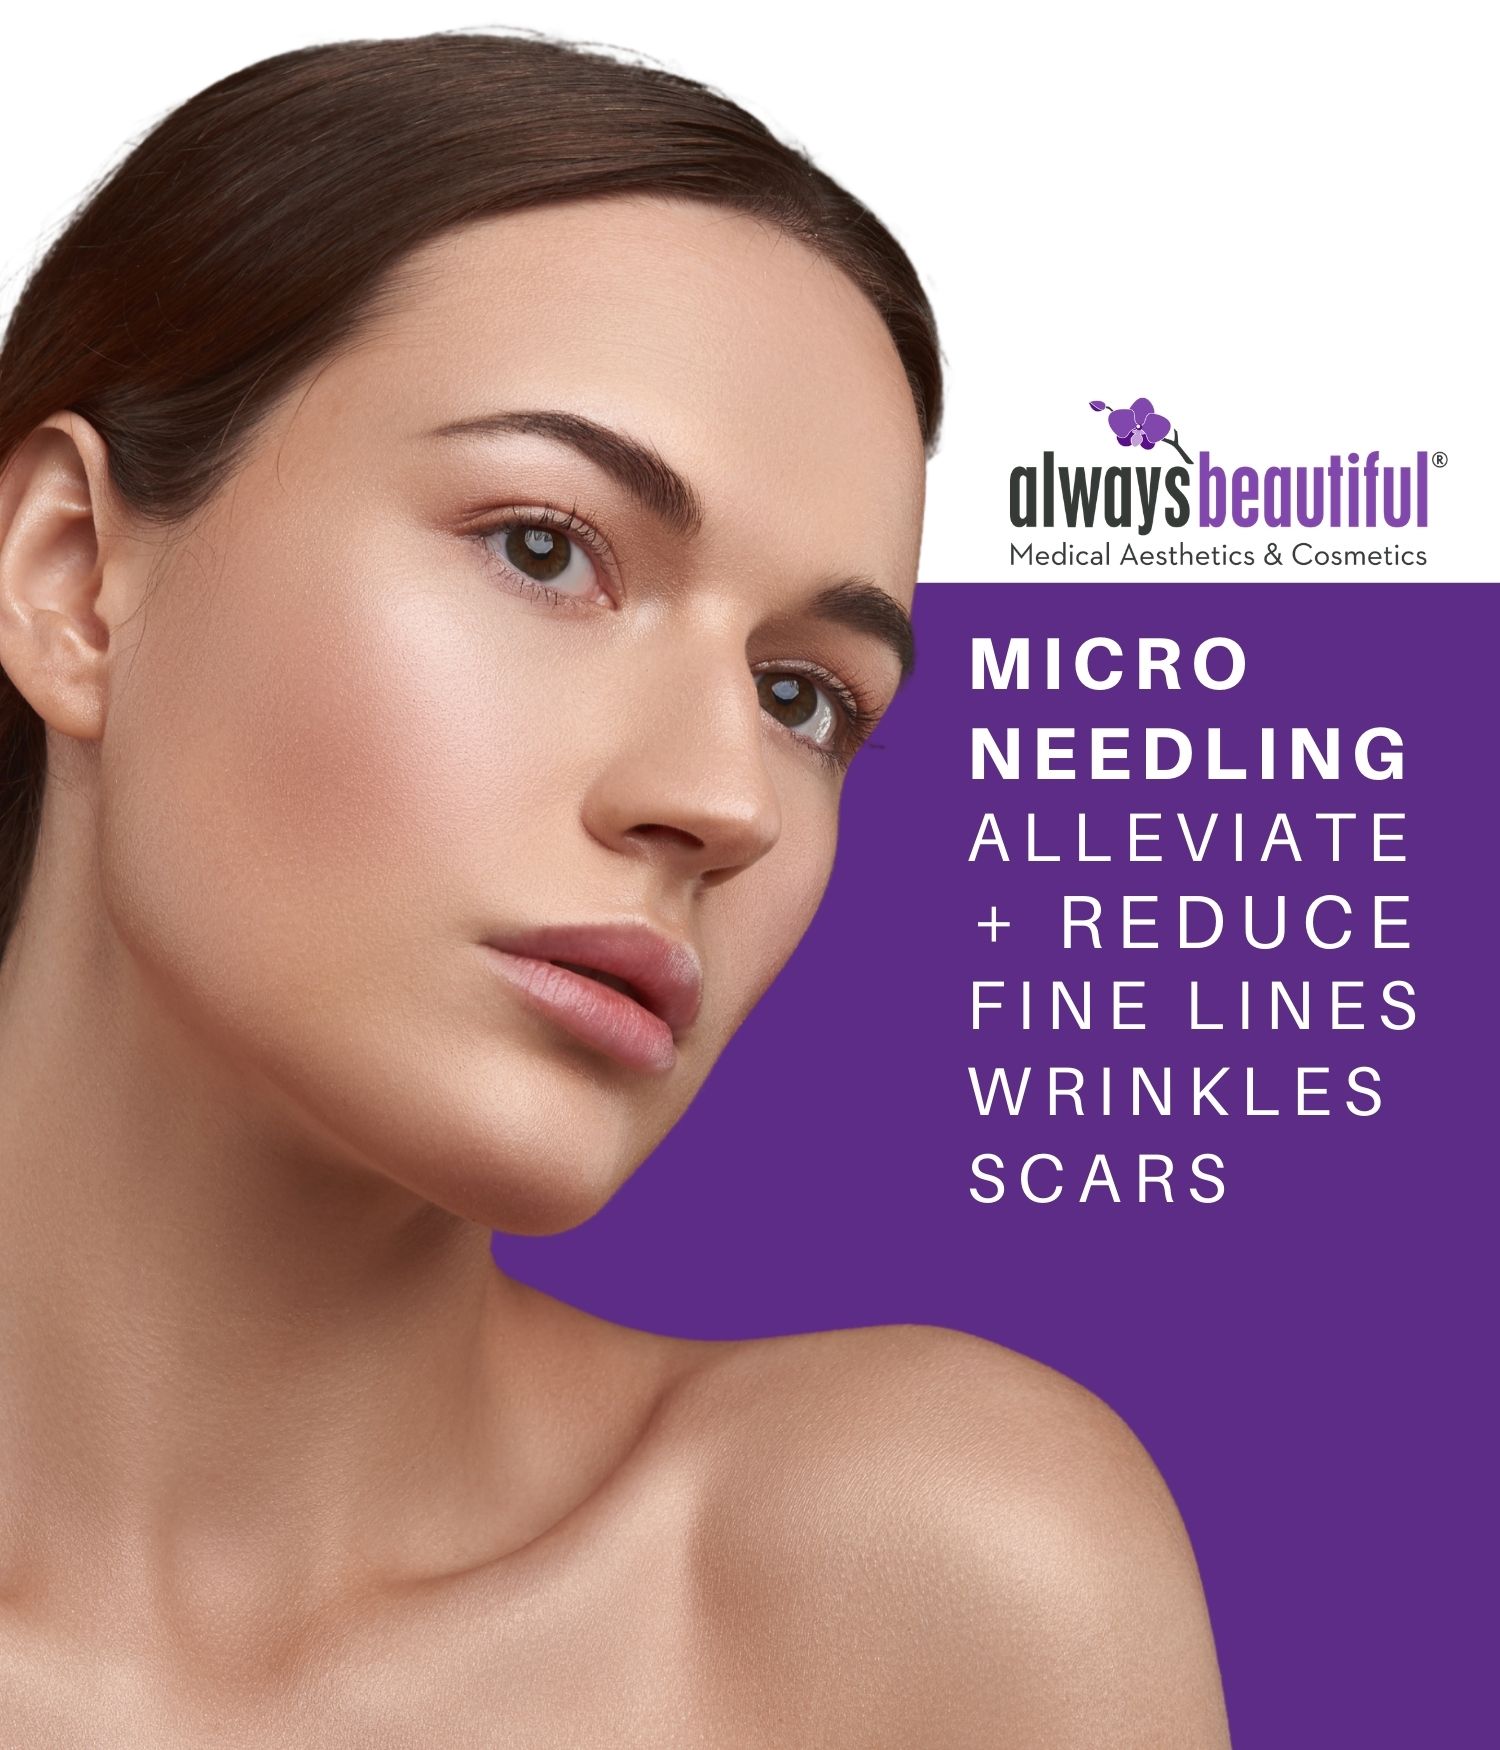 Woman with reduced fine lines and wrinkles after microneedling treatment at Always Beautiful.